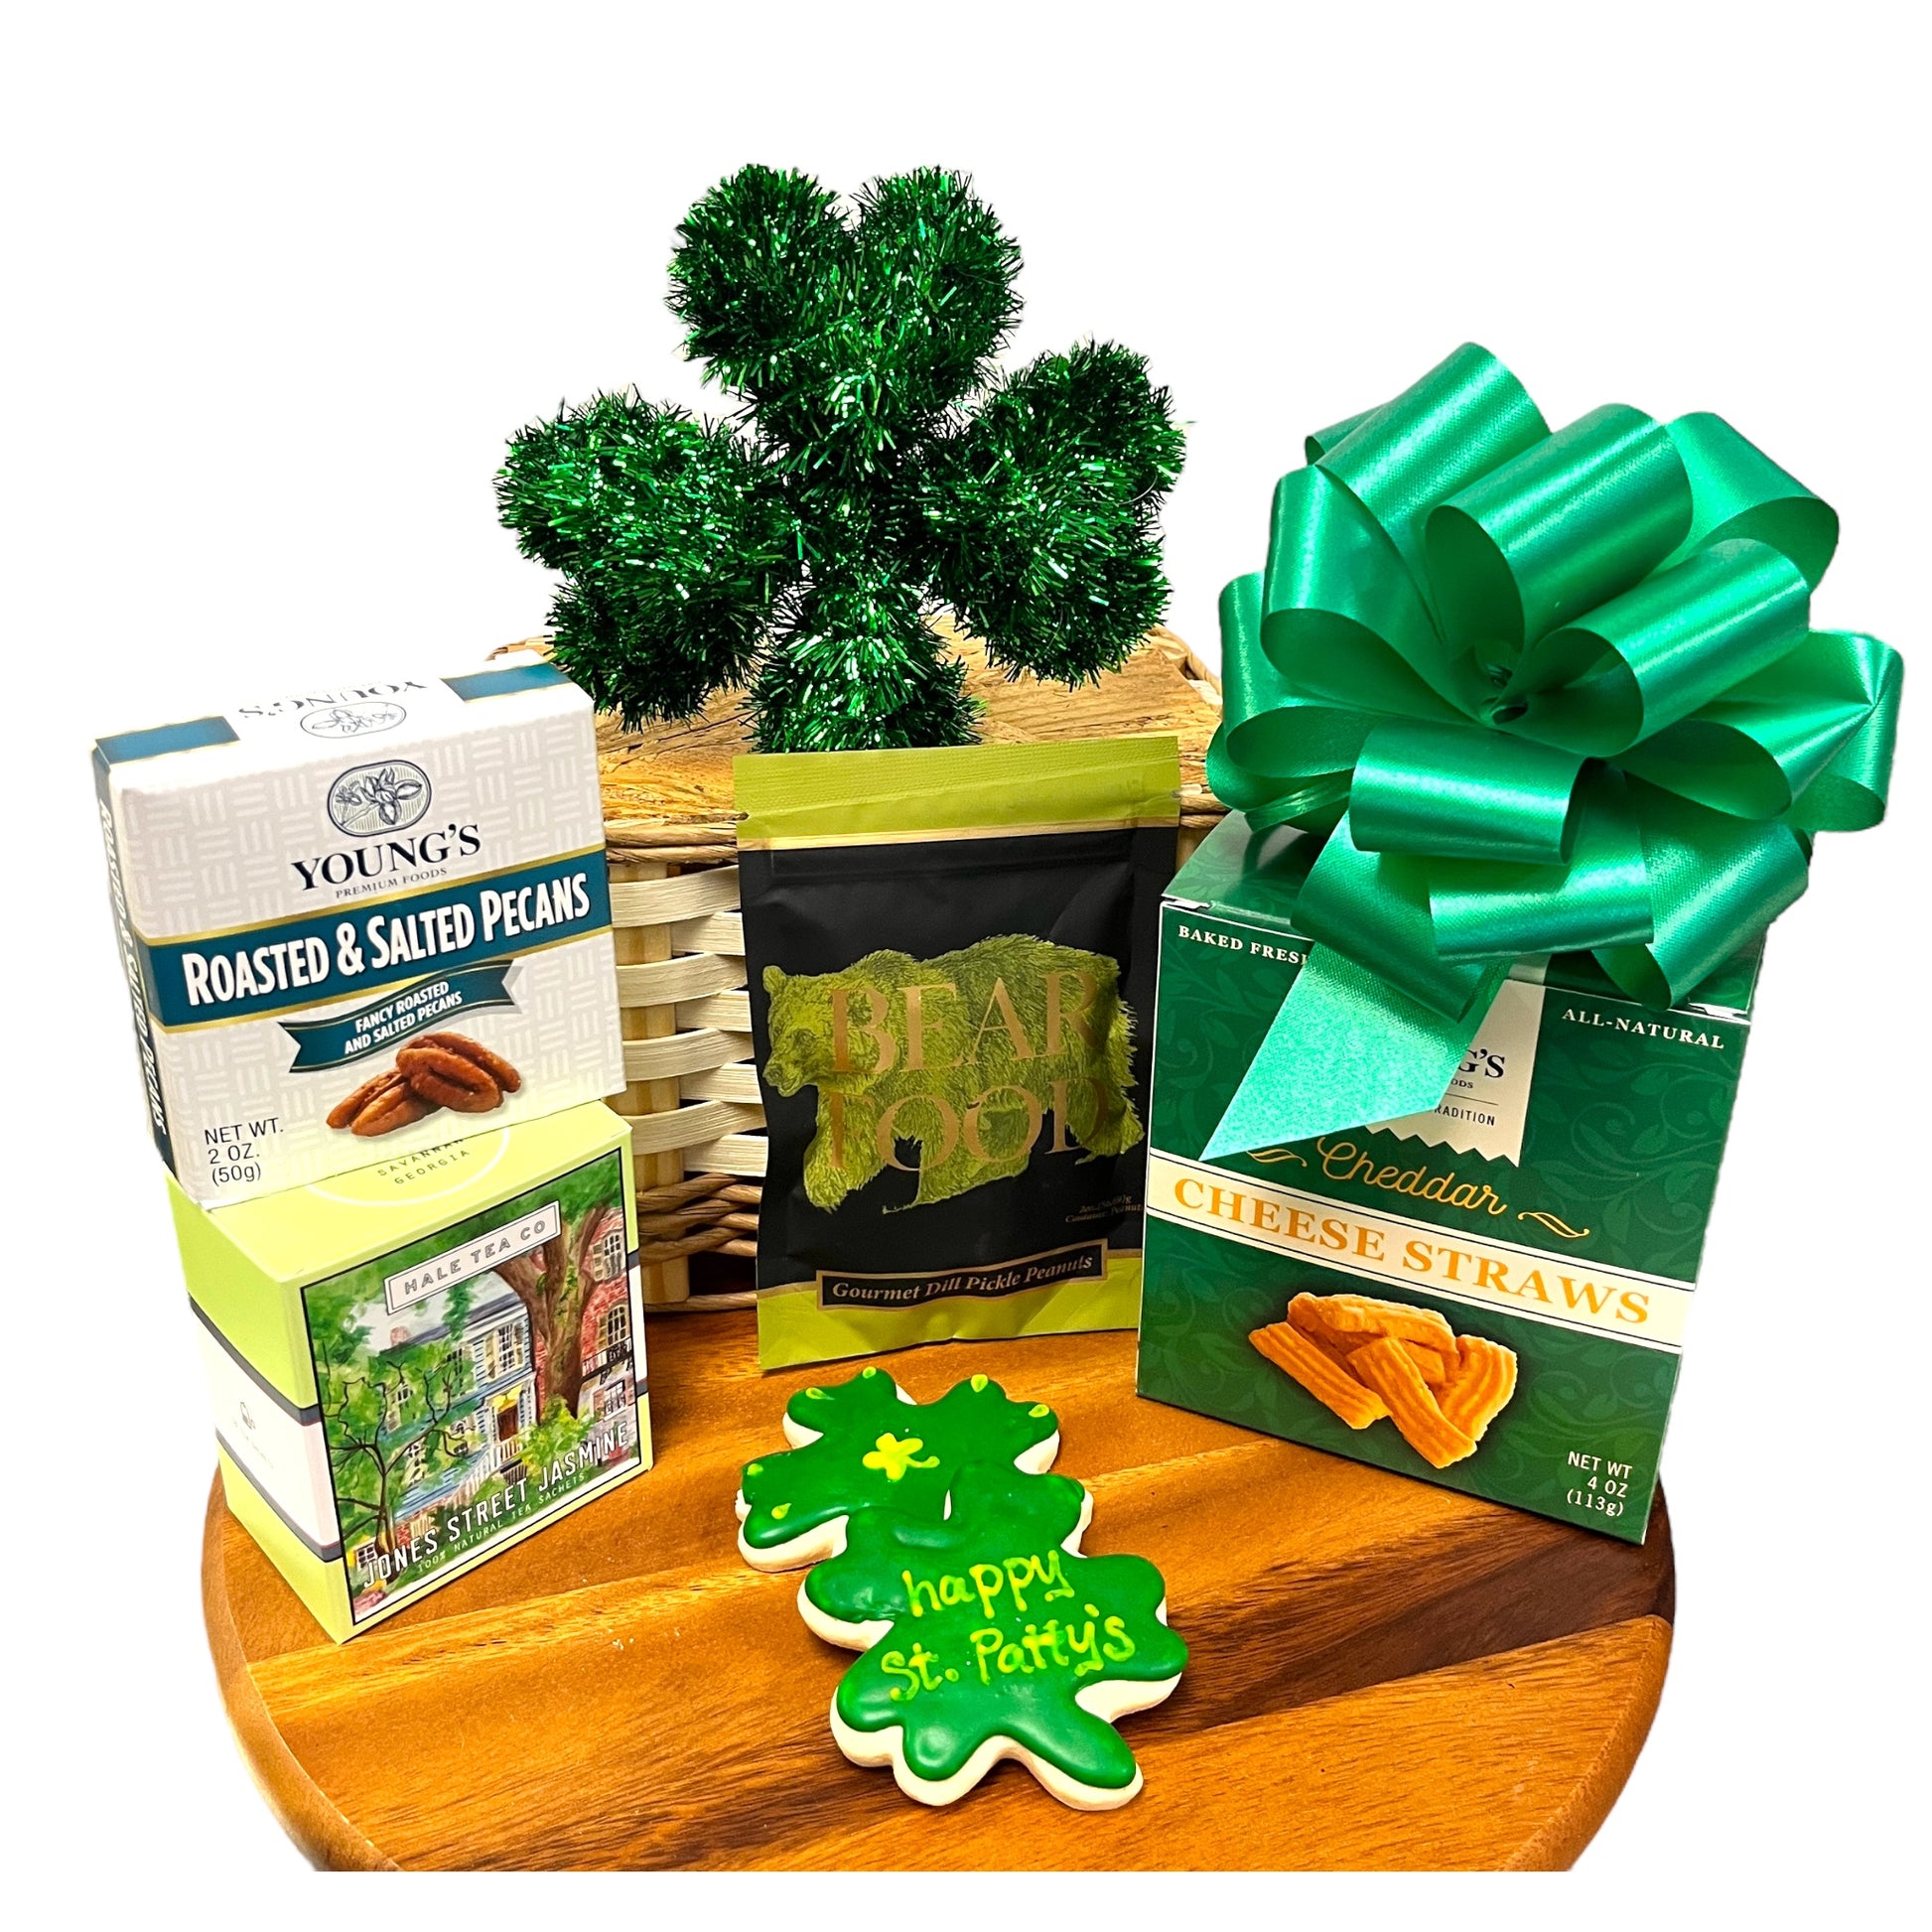 St. Patrick's Day gifts